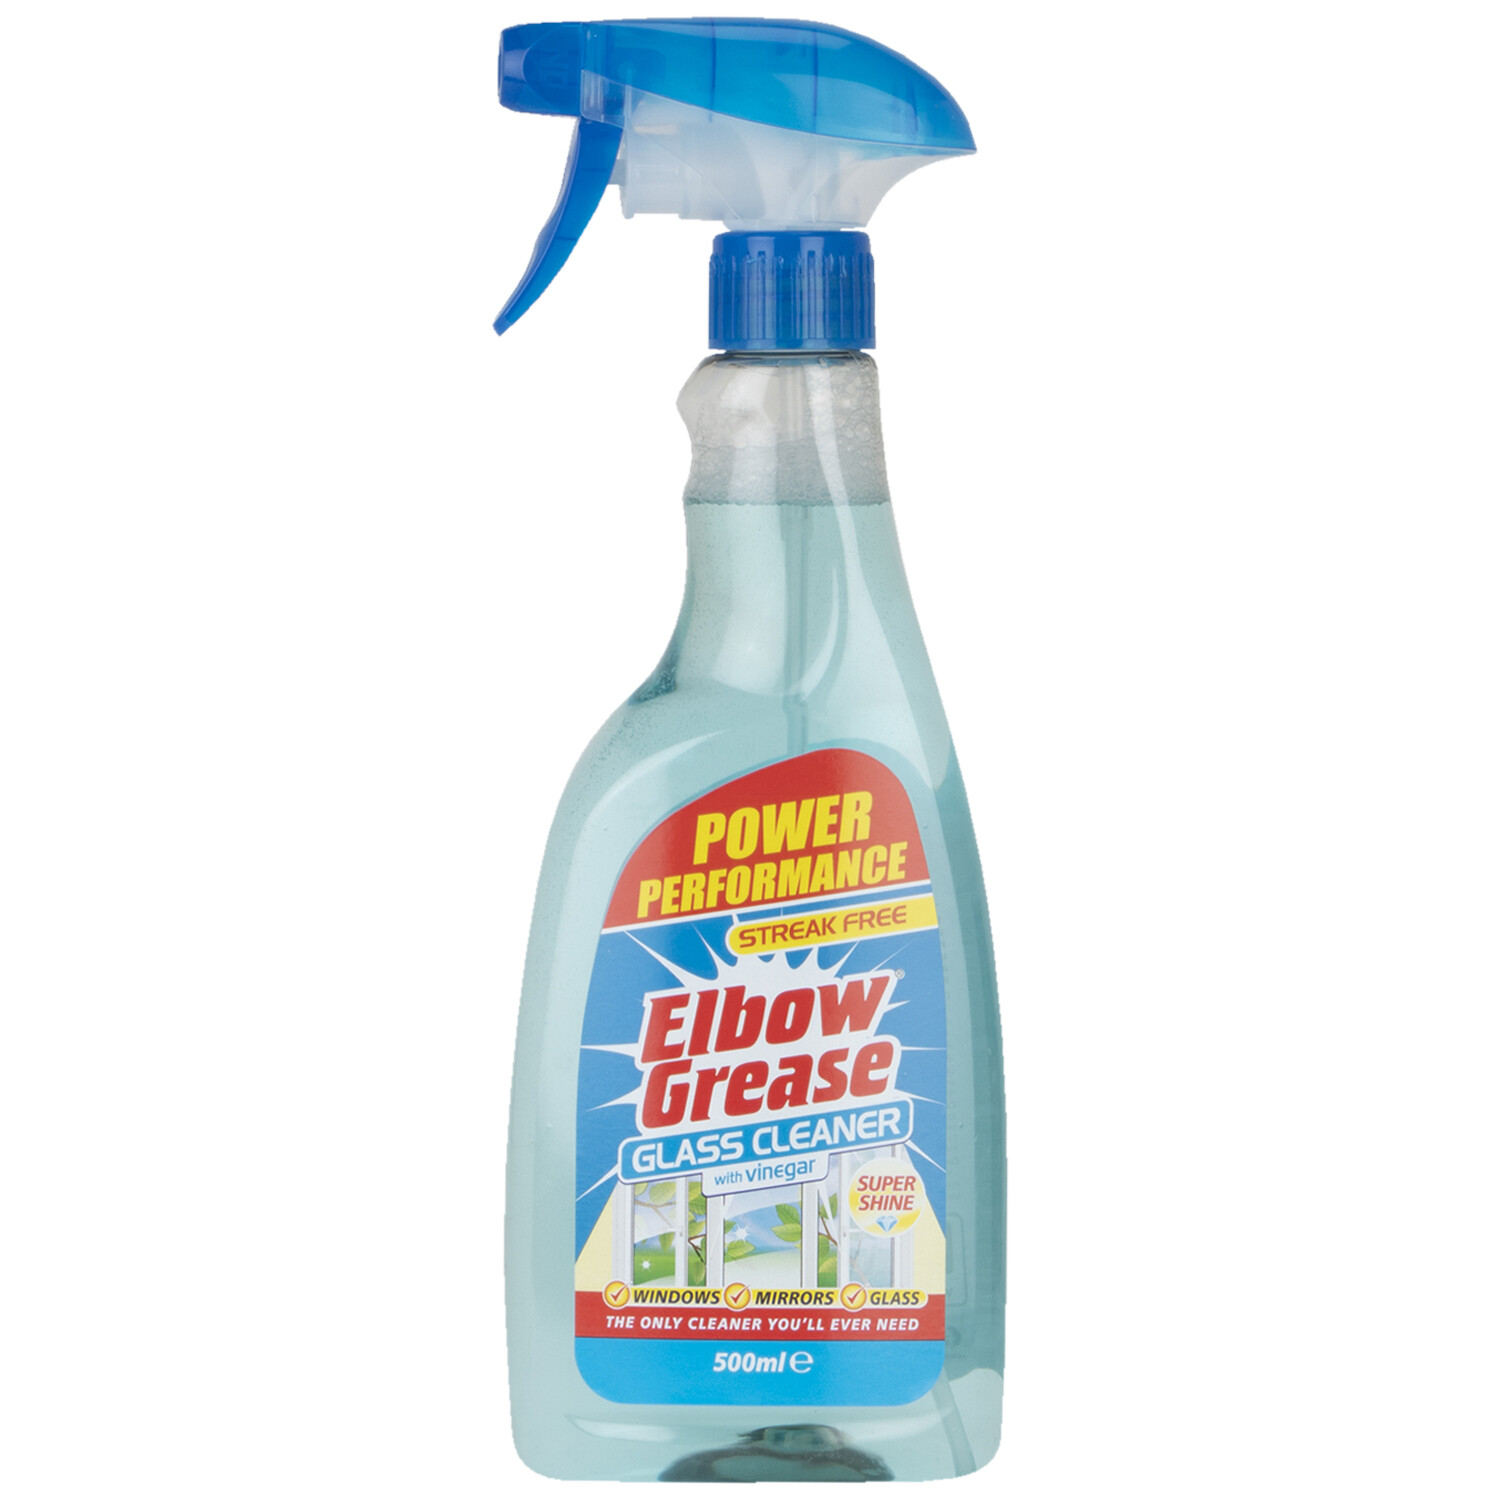 Elbow Grease Glass Cleaner 500ml Image